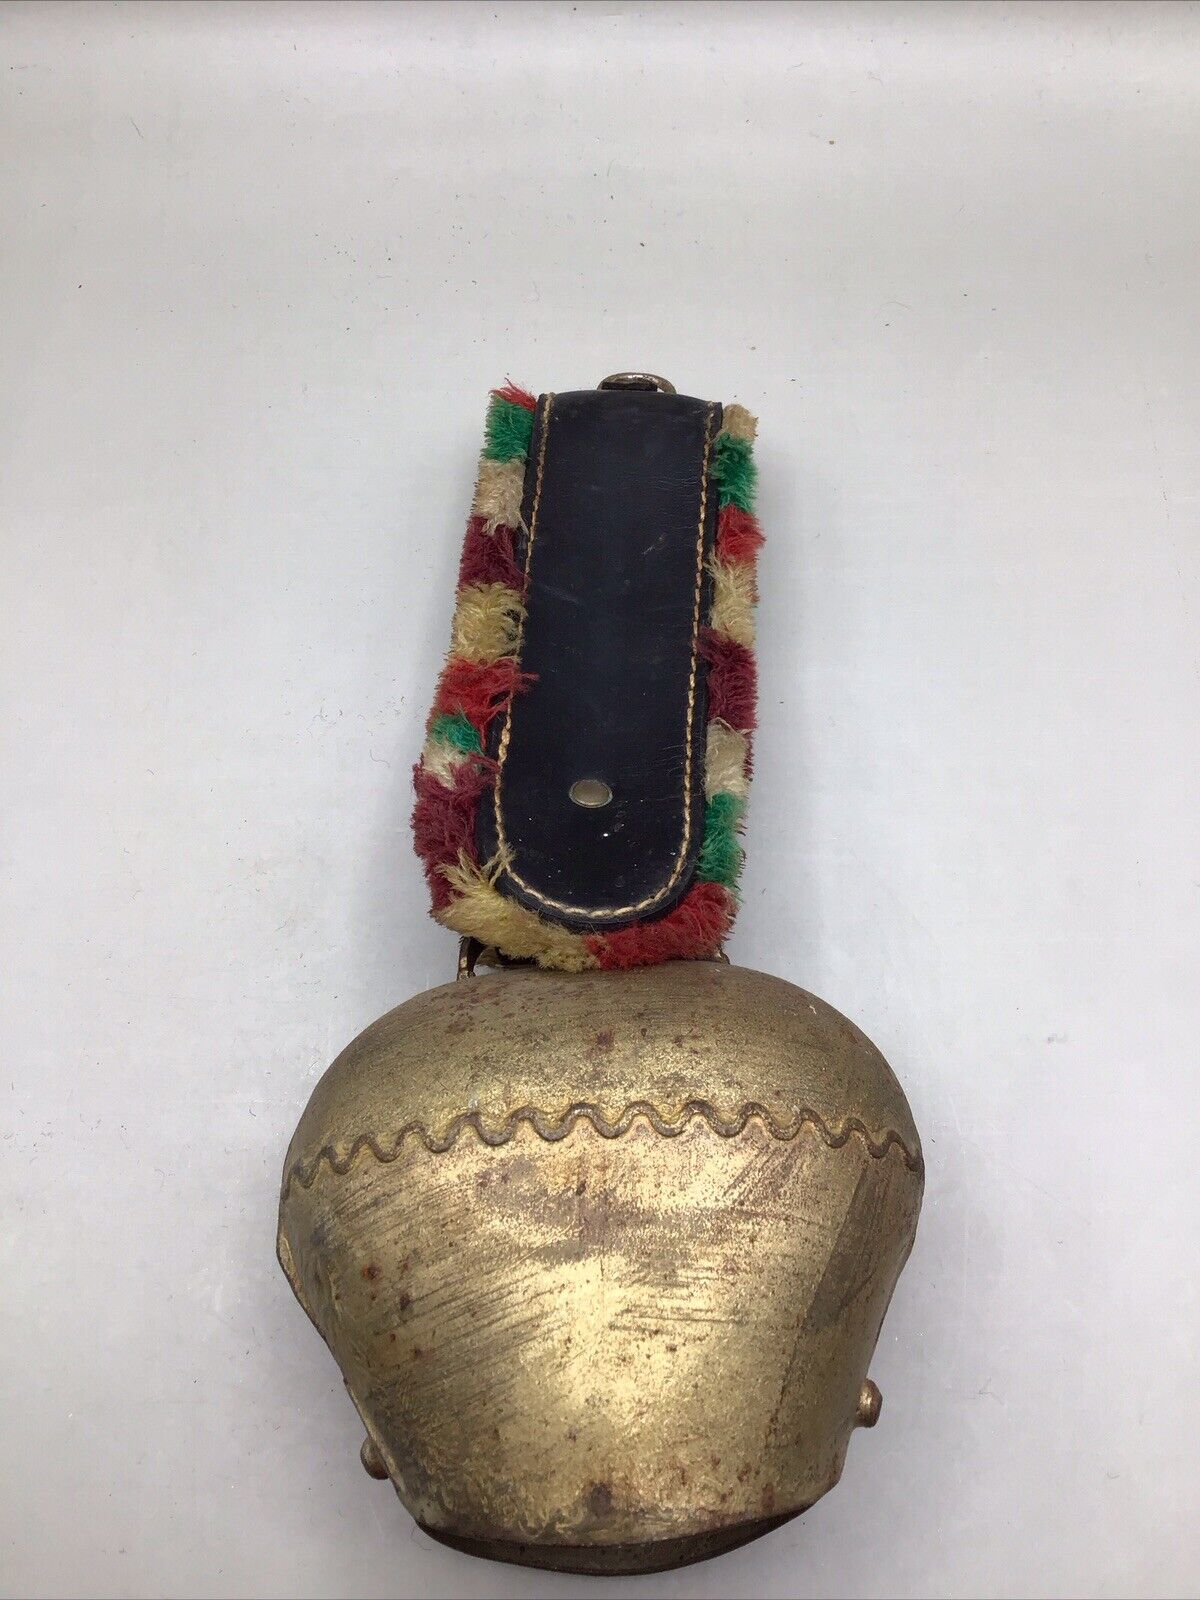 Vintage Rustic Swiss Austrian Brass Cow Bell with Fringed Leather Strap